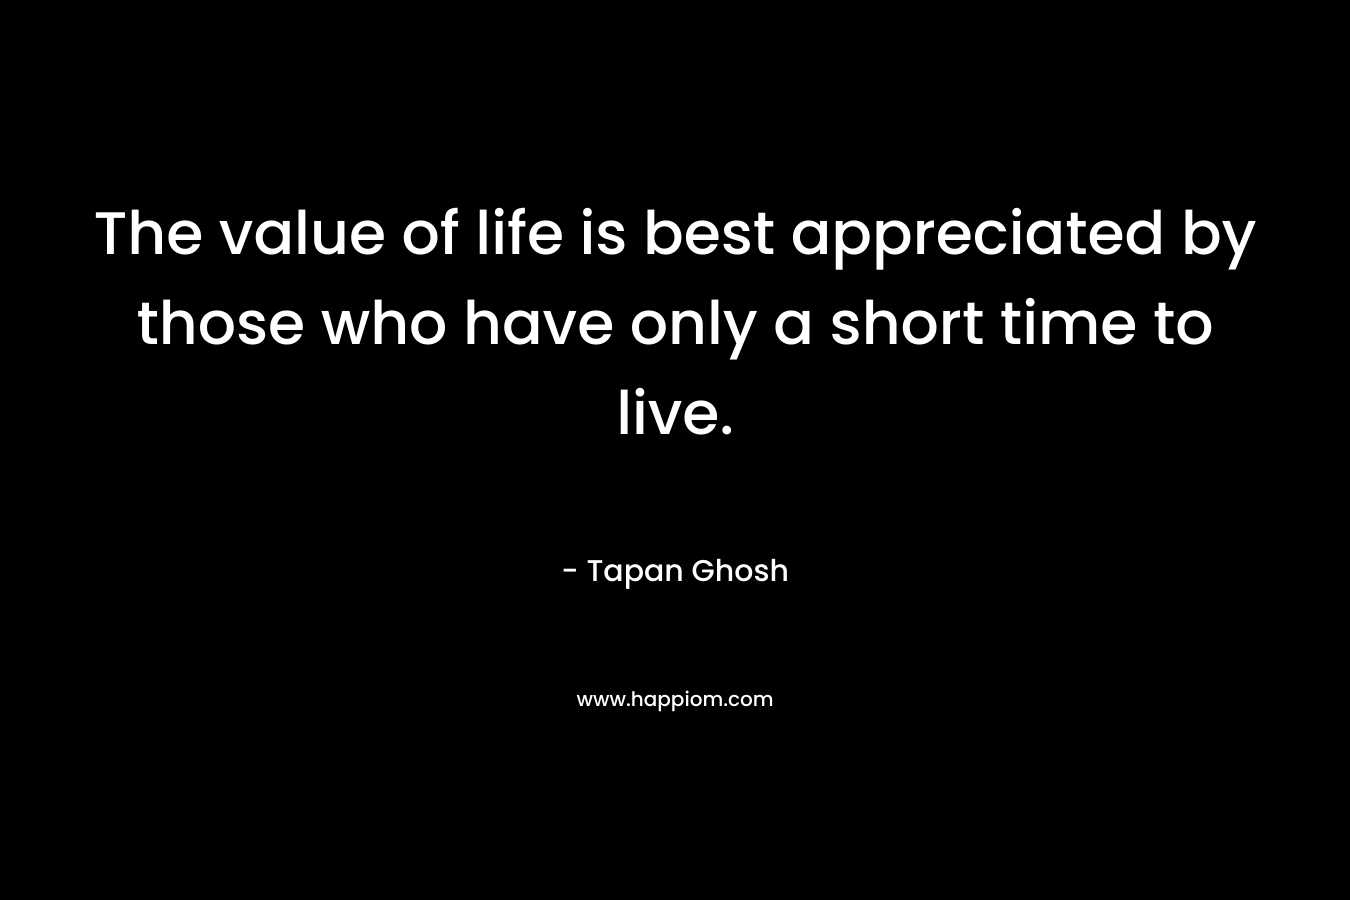 The value of life is best appreciated by those who have only a short time to live.